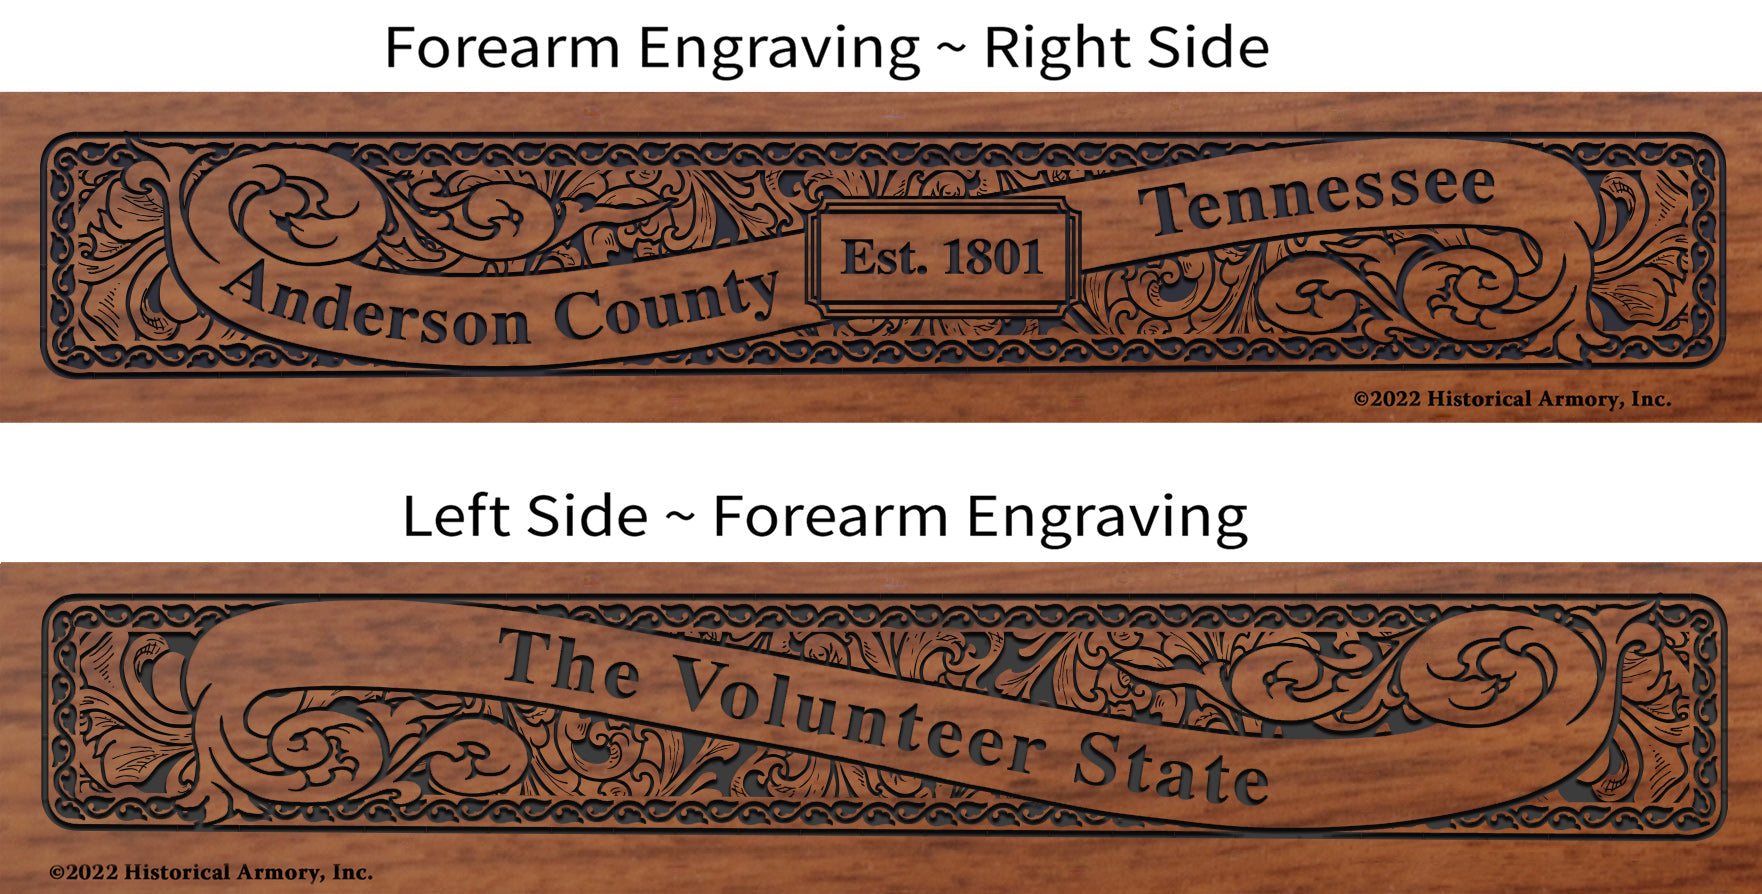 Anderson County Tennessee Engraved Rifle Forearm